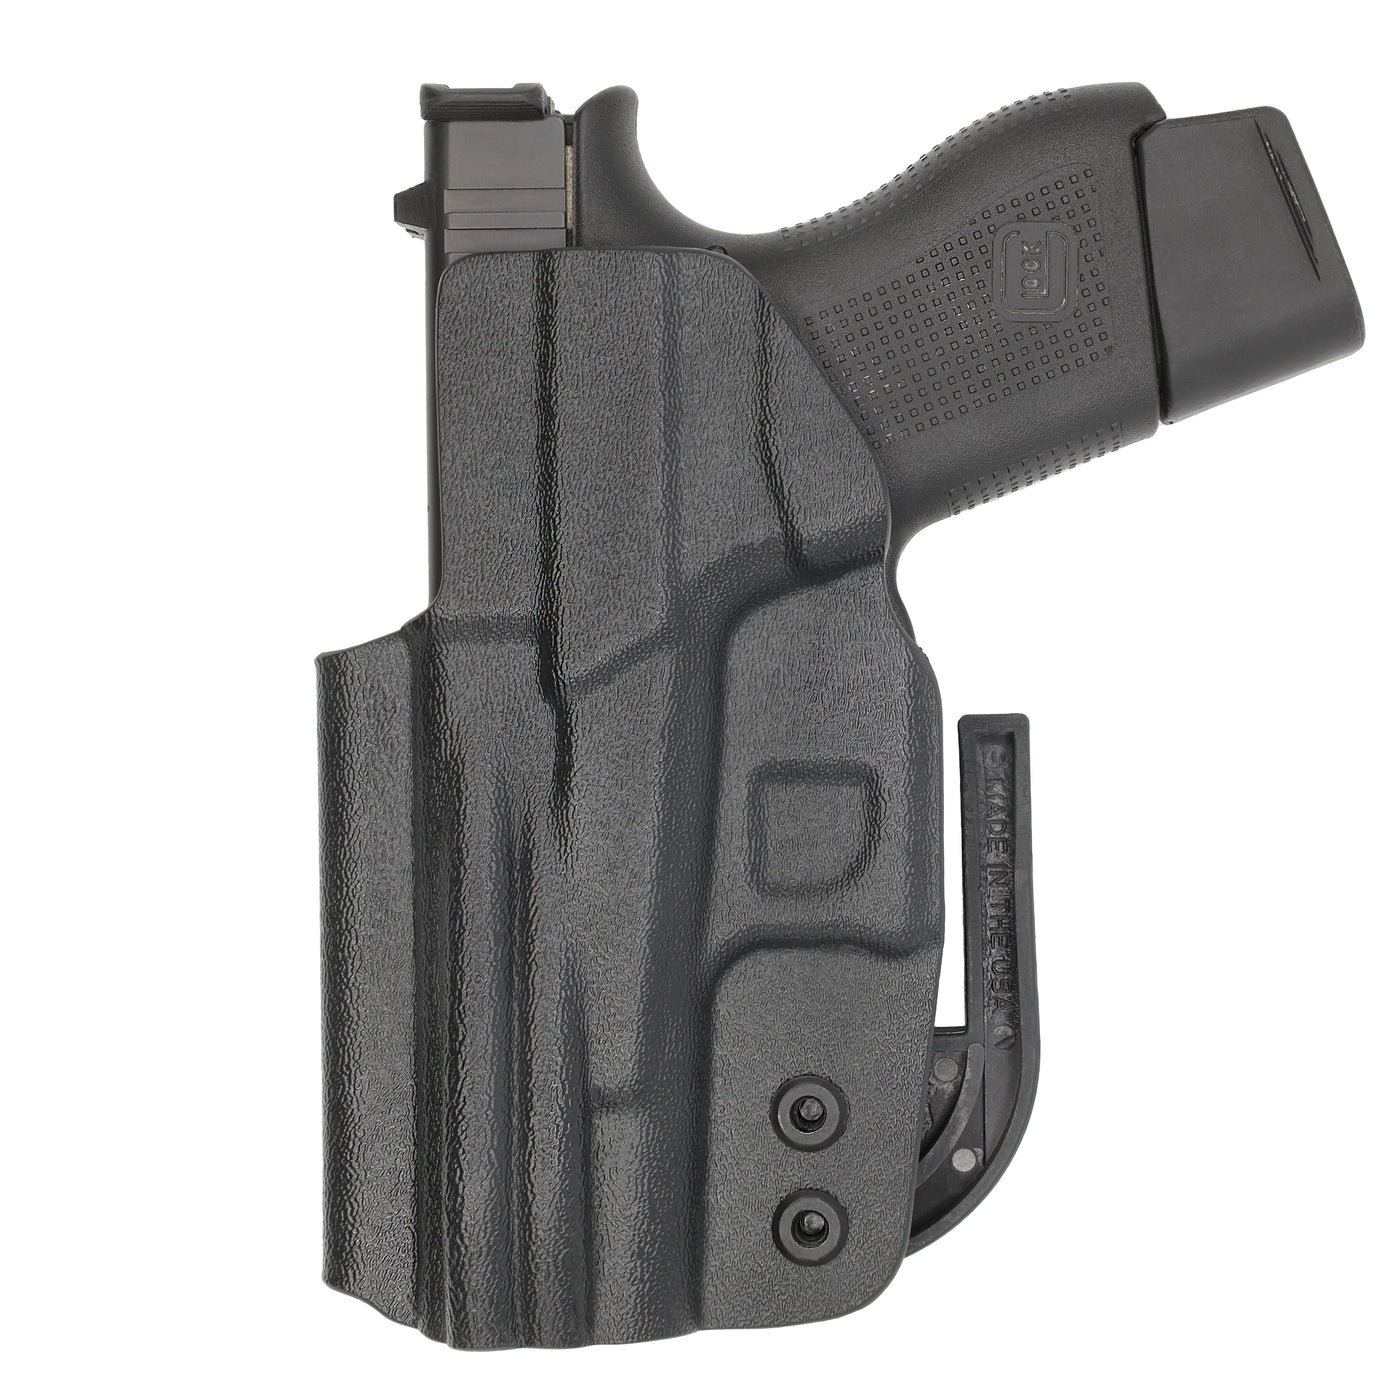 C&G Holsters quickship IWB ALPHA UPGRADE covert Glock 42 in holstered position back view